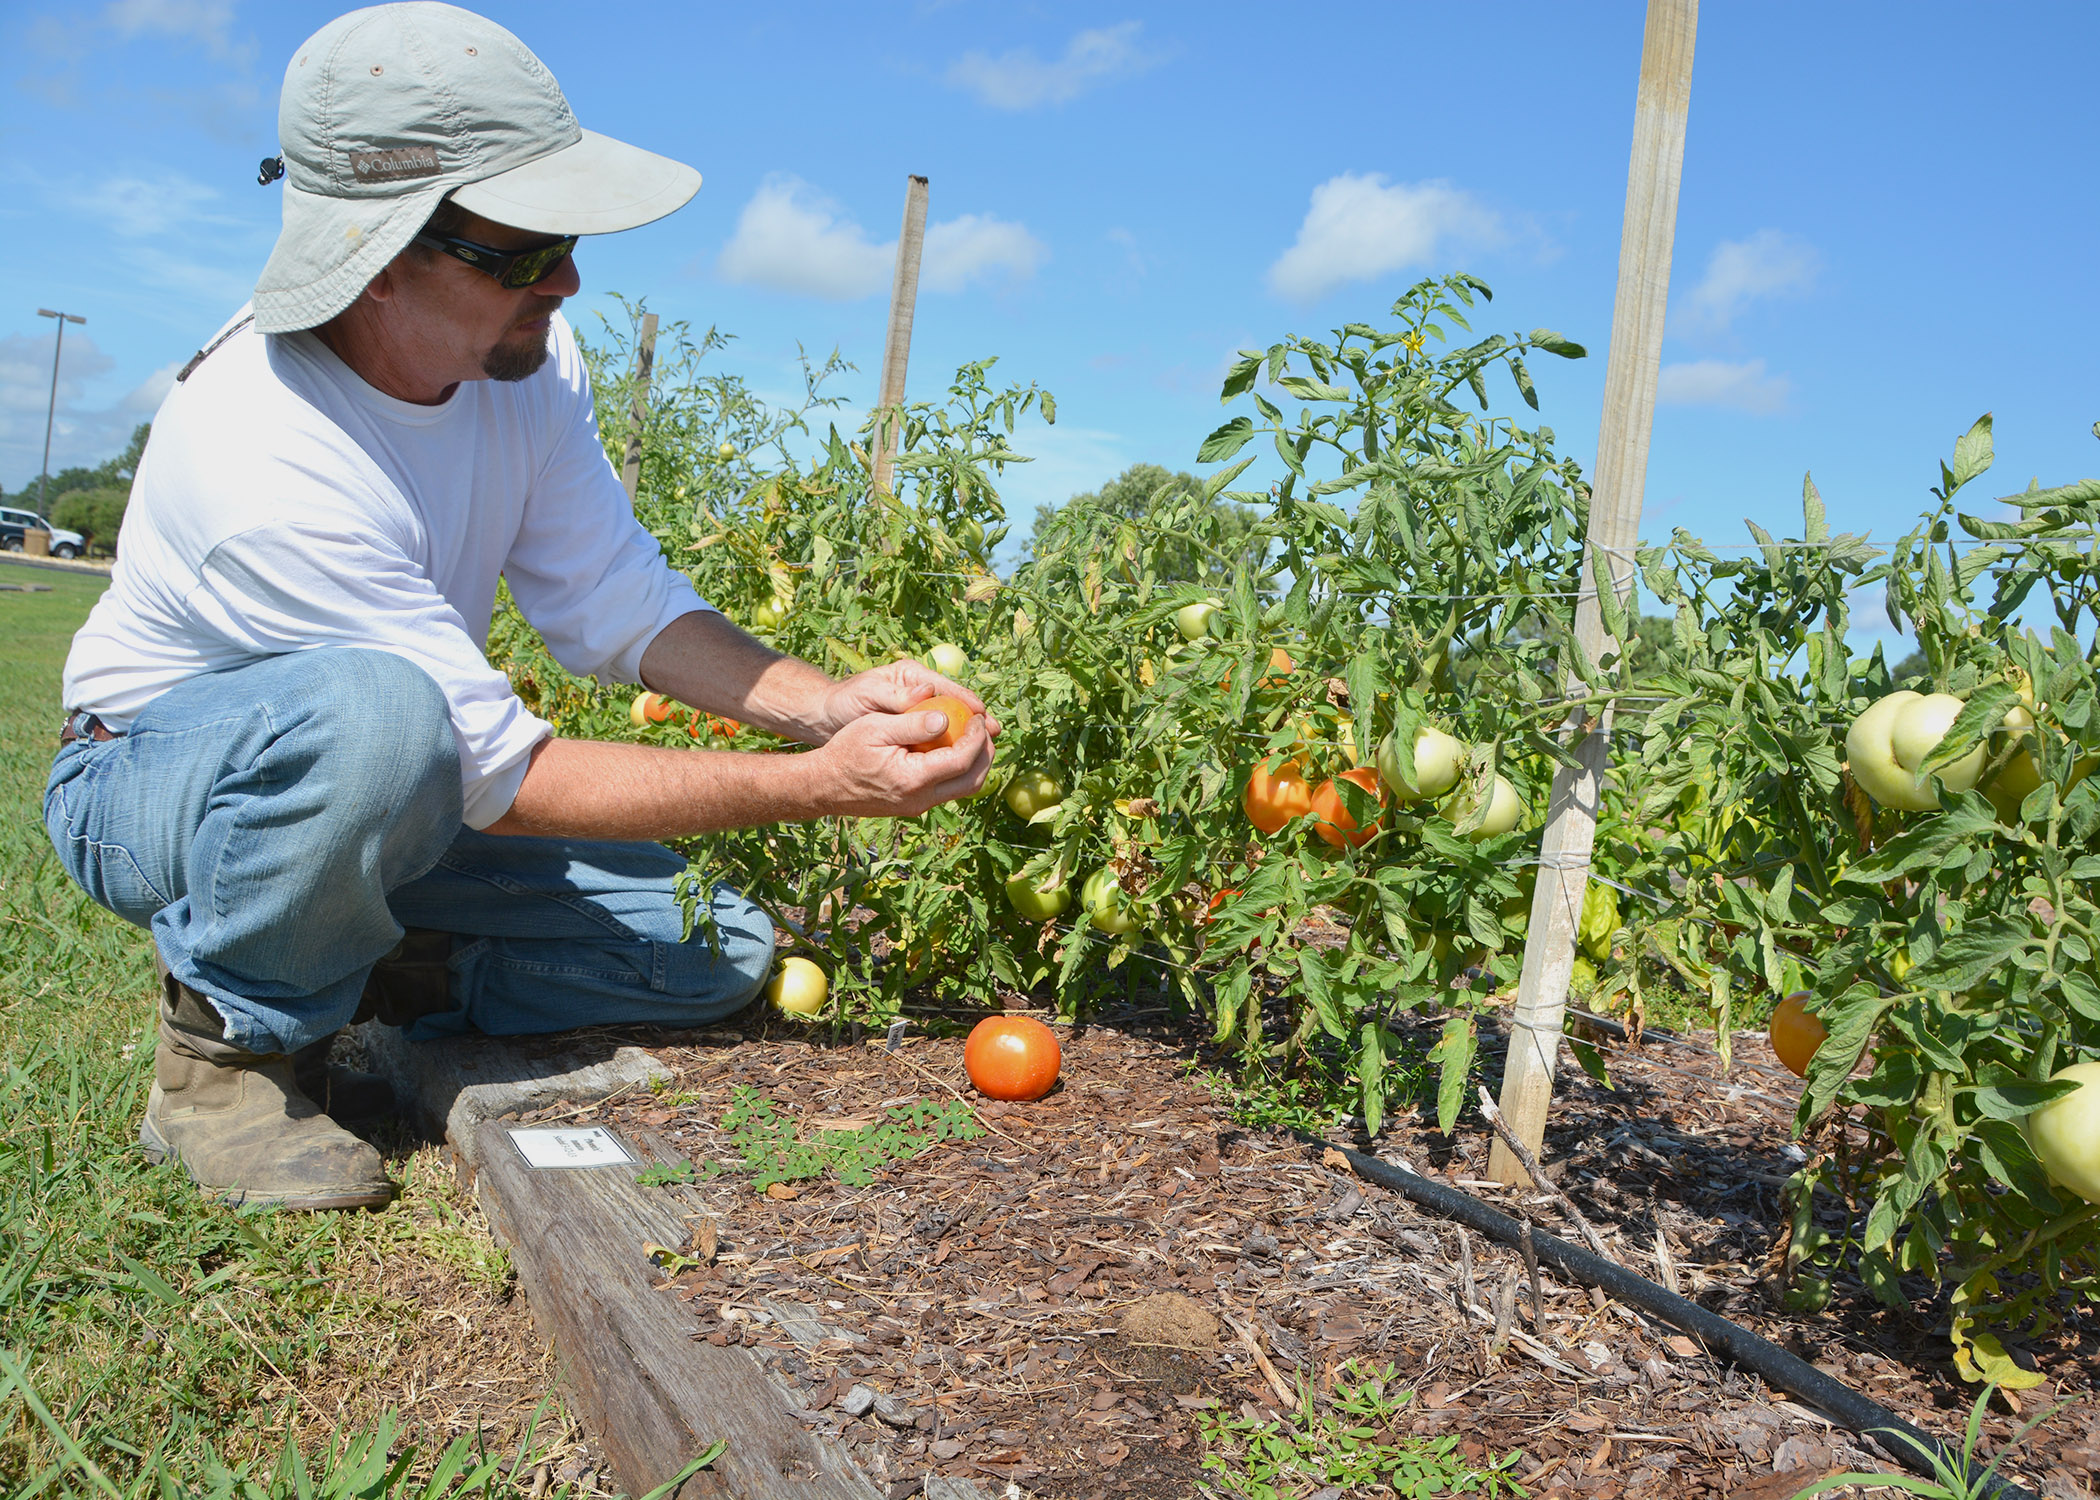 Thomas county crop production and horticulture extension agent